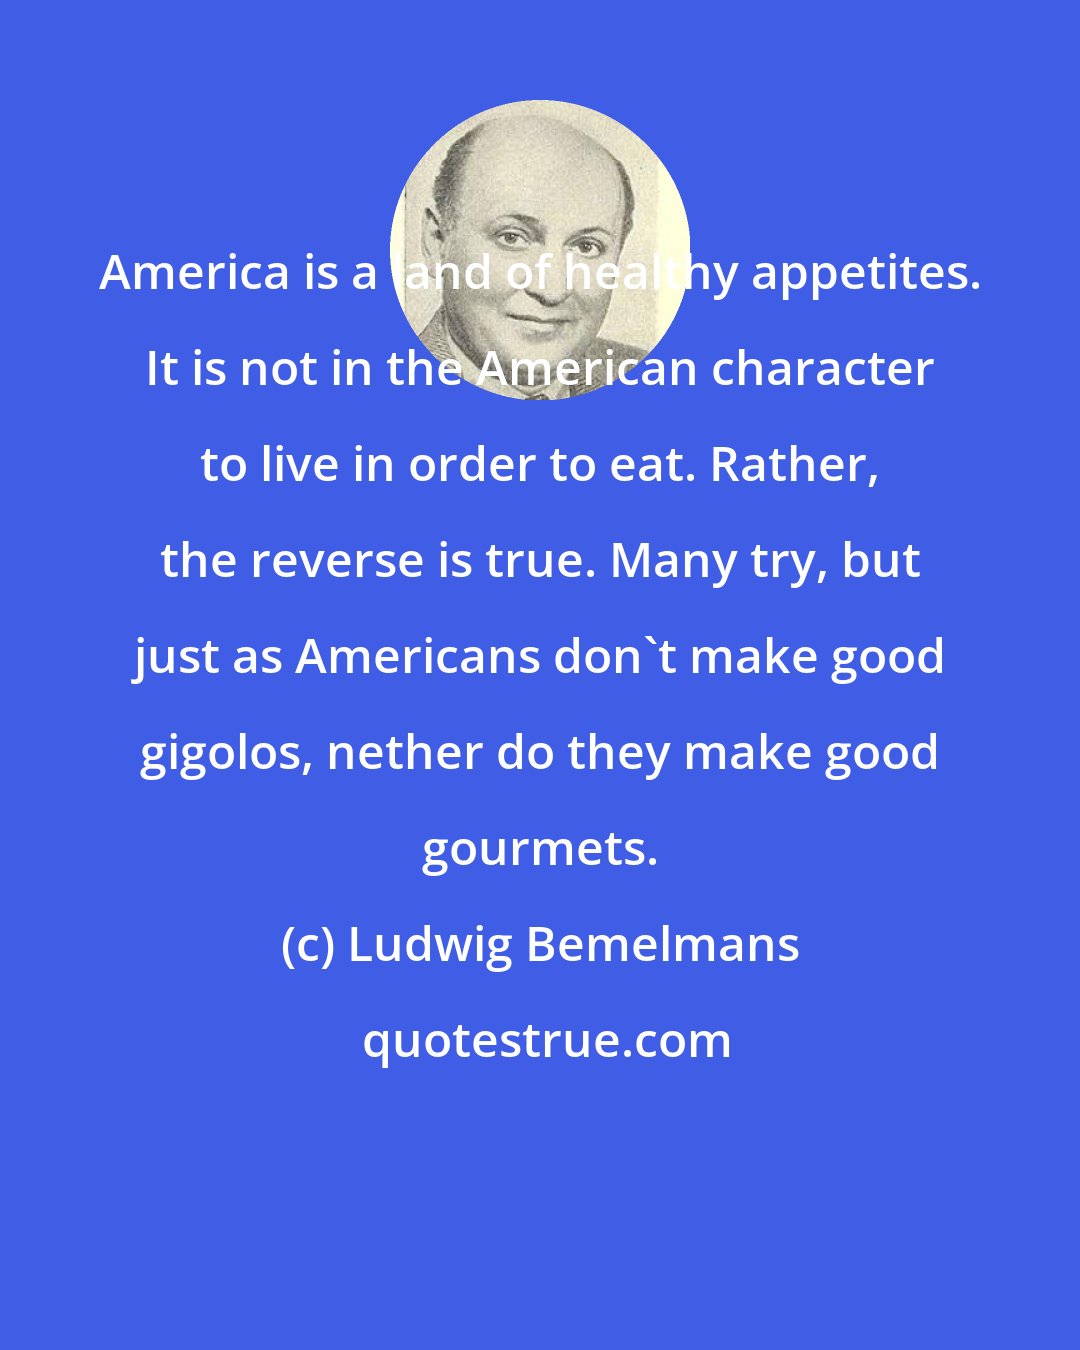 Ludwig Bemelmans: America is a land of healthy appetites. It is not in the American character to live in order to eat. Rather, the reverse is true. Many try, but just as Americans don't make good gigolos, nether do they make good gourmets.